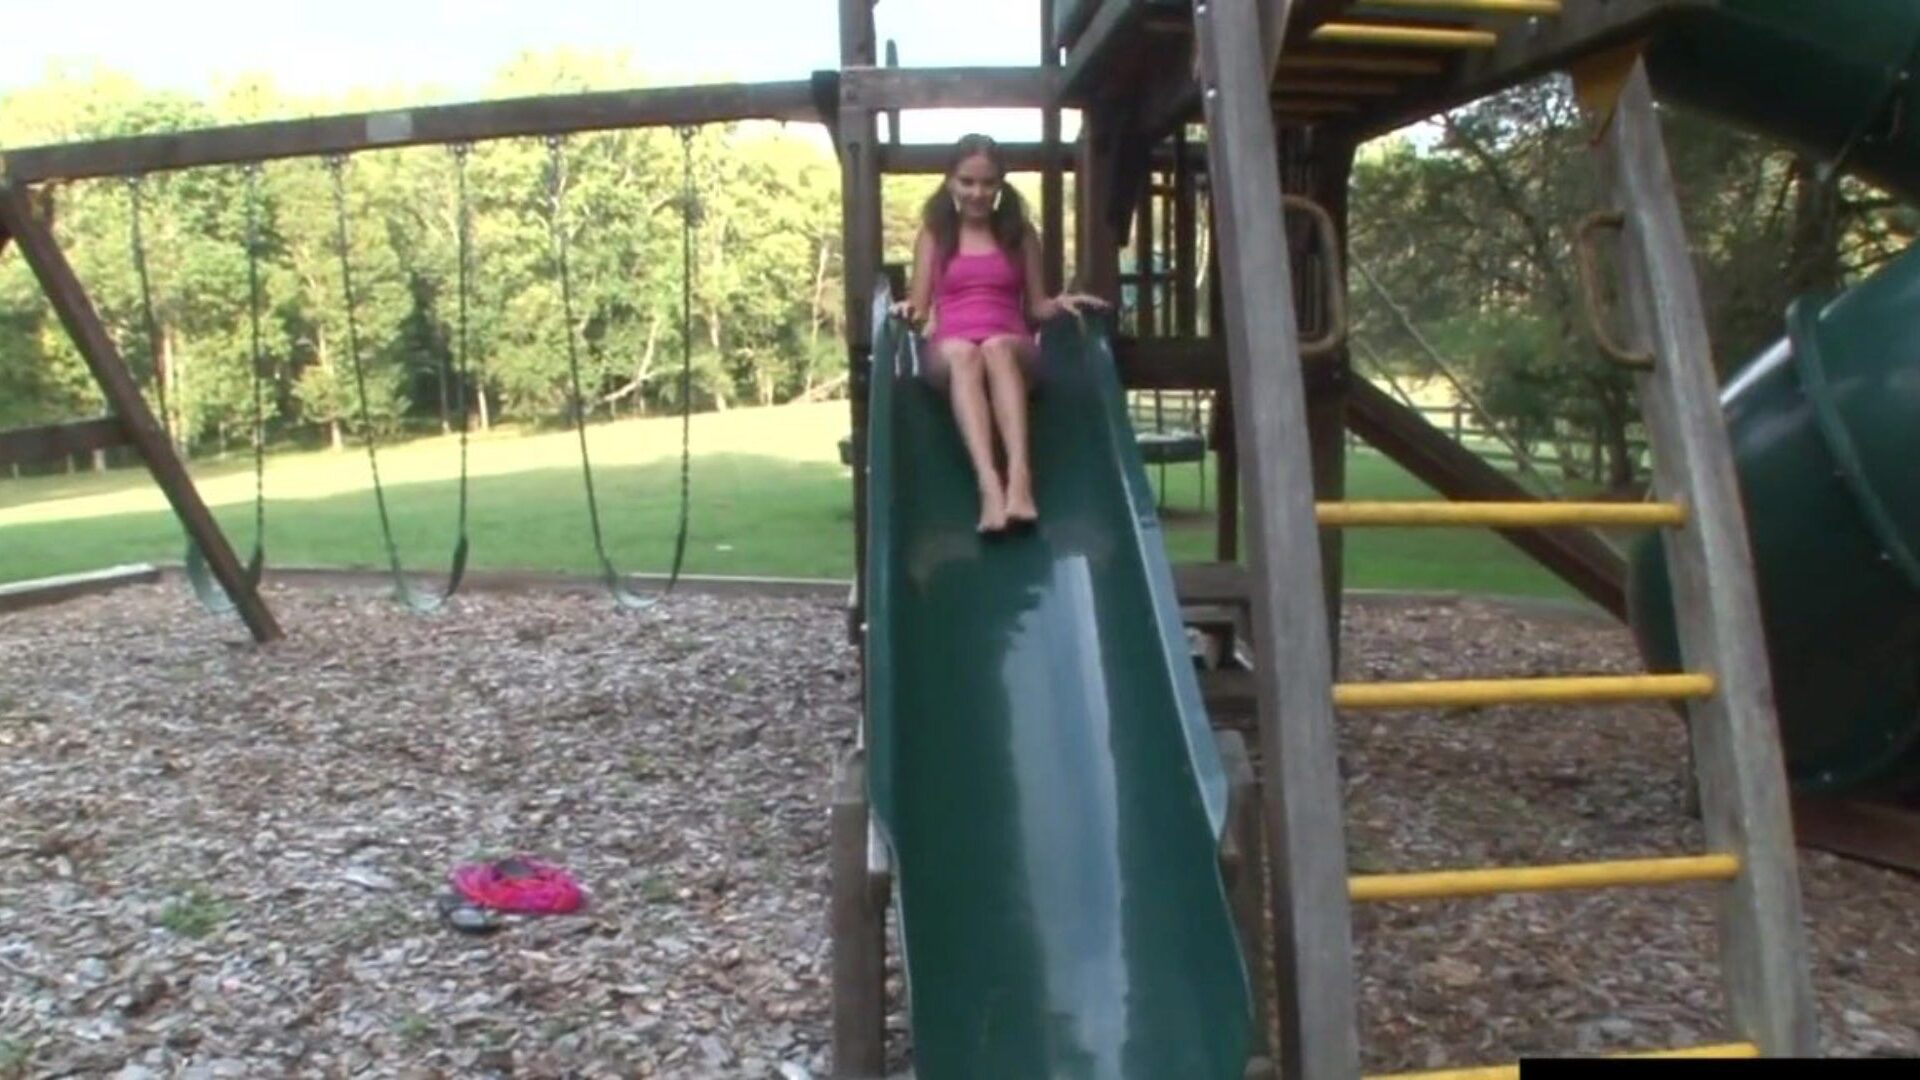 Camgirl gets off at the playground